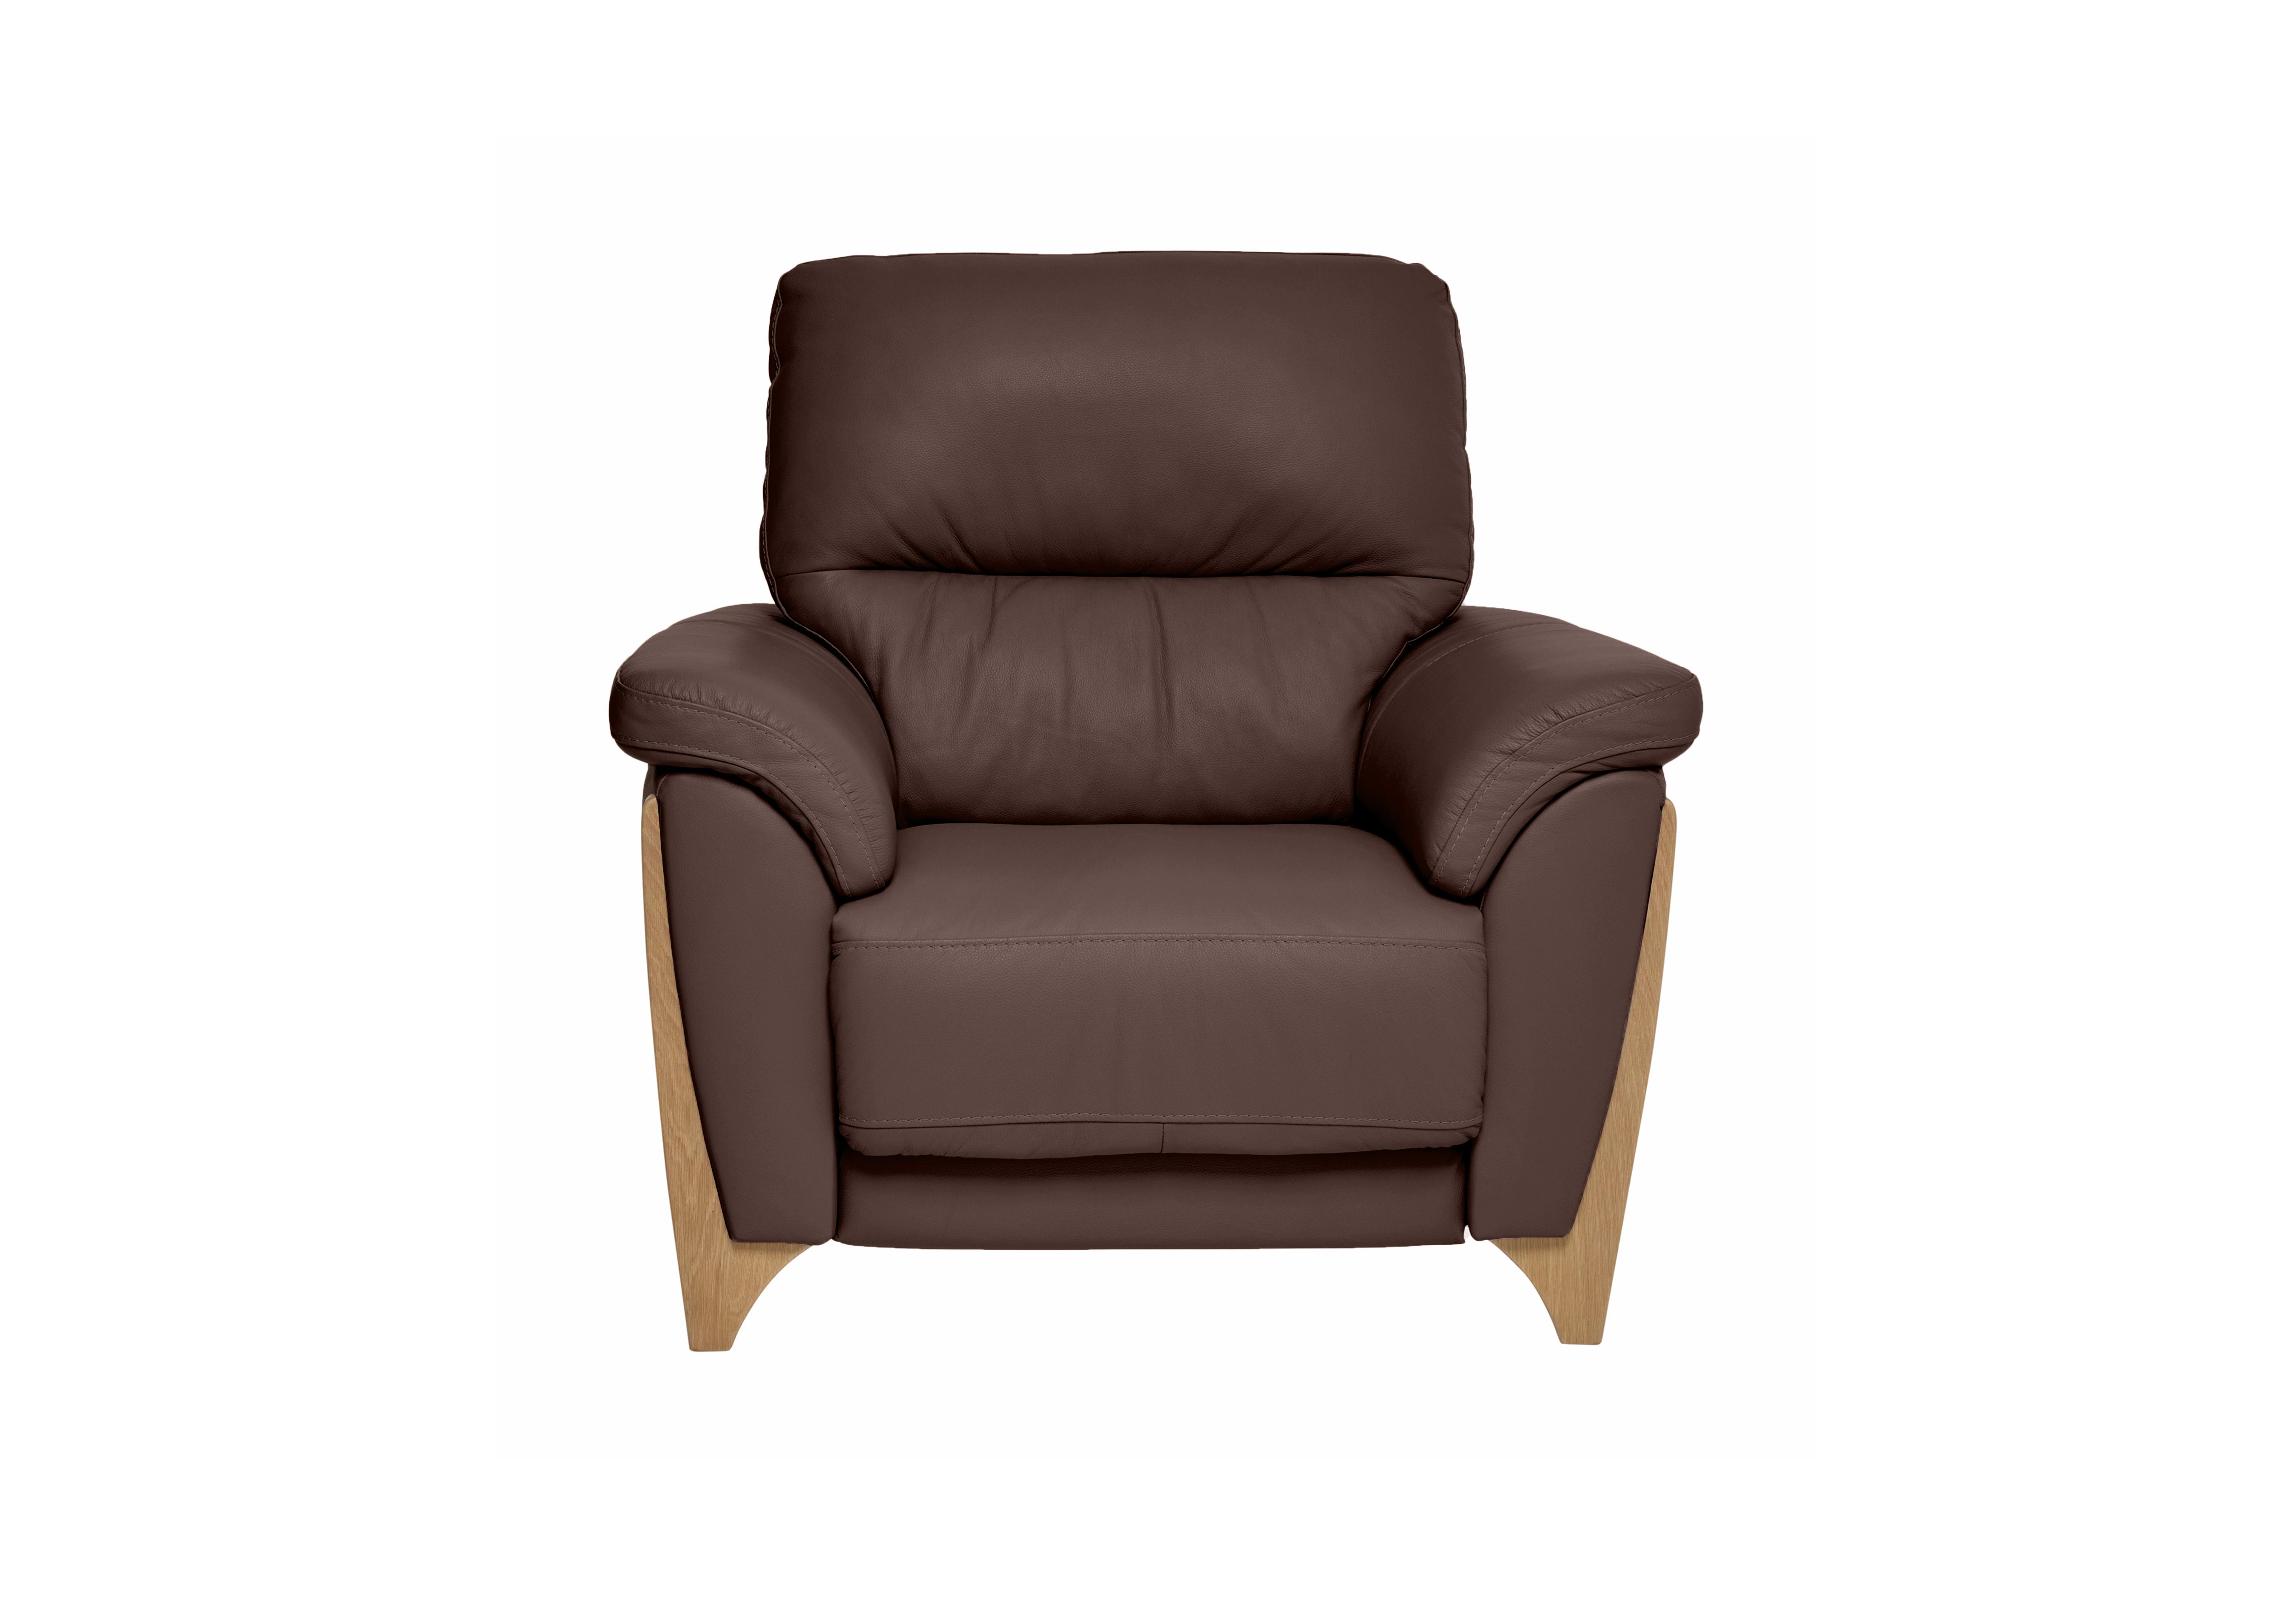 Enna Leather Power Recliner Armchair in L901 on Furniture Village